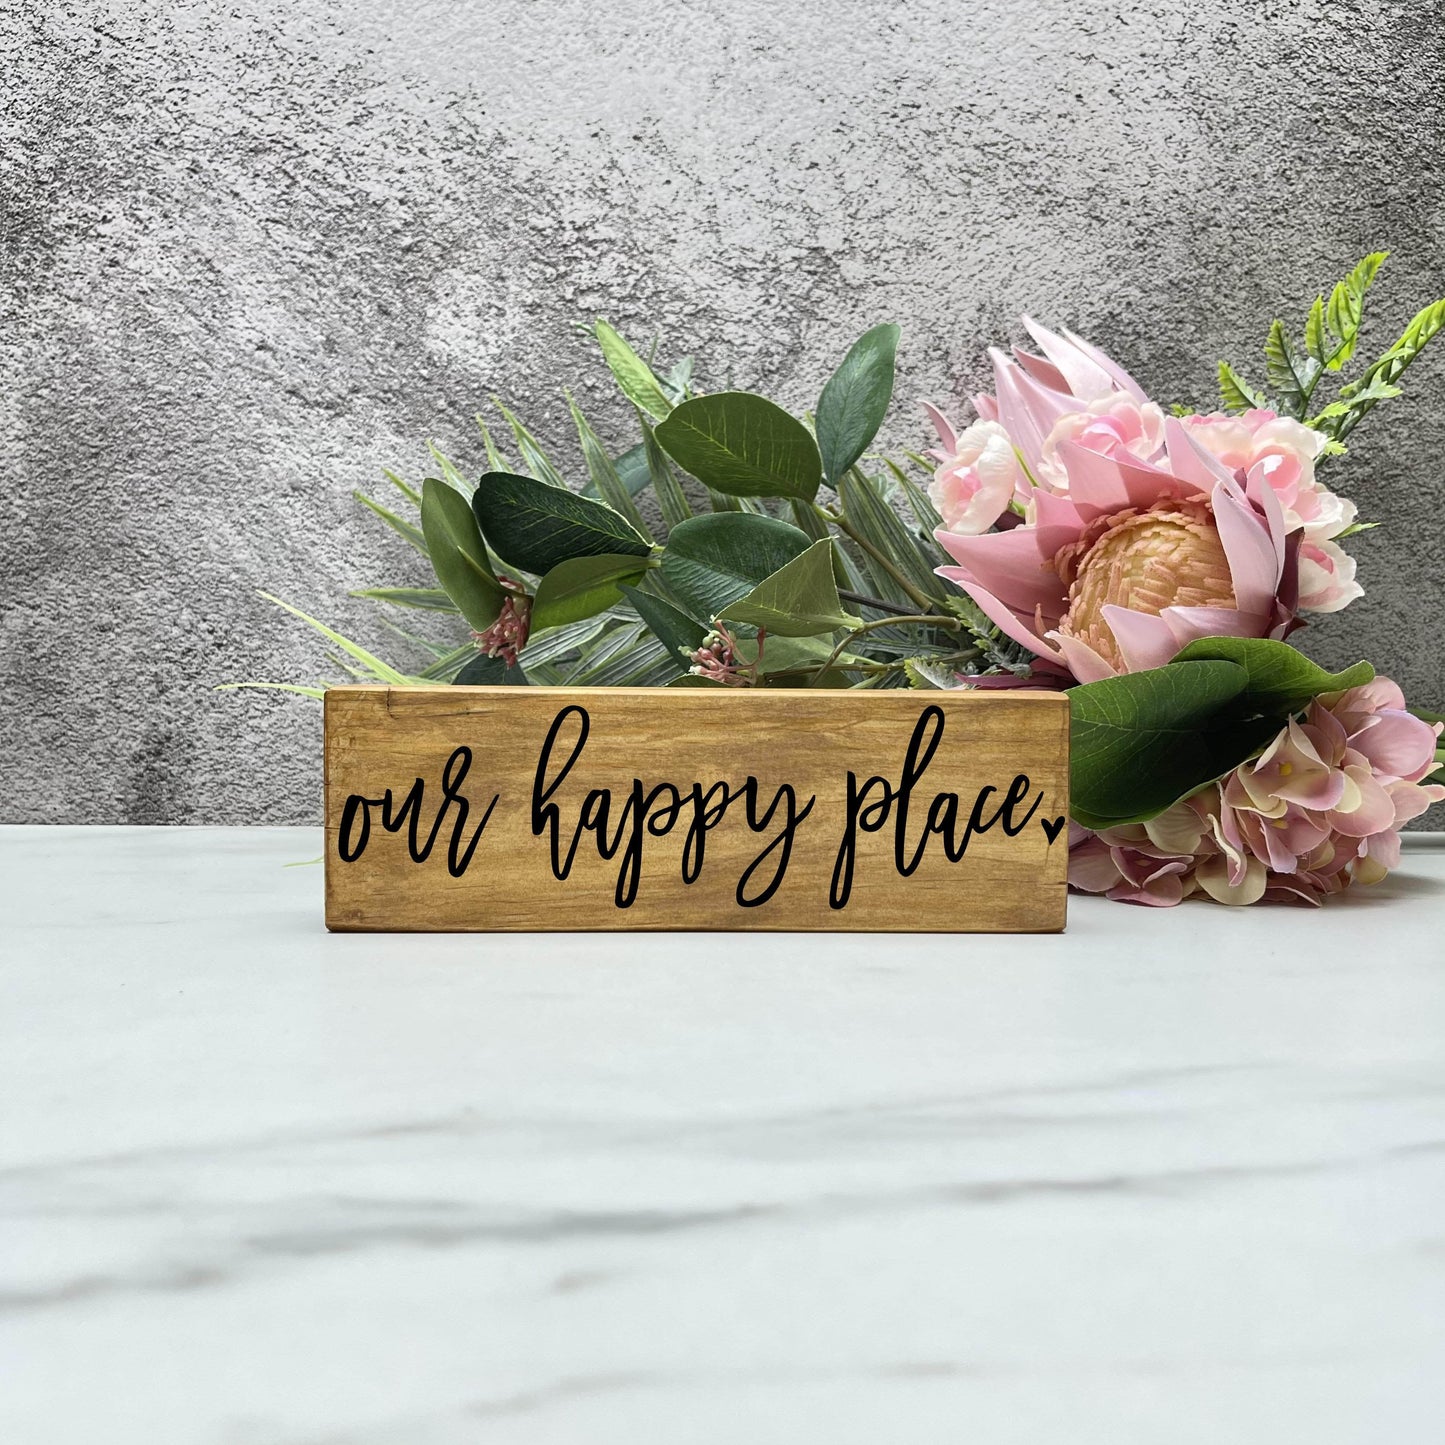 Our happy place wood sign, farmhouse sign, rustic decor, home decor